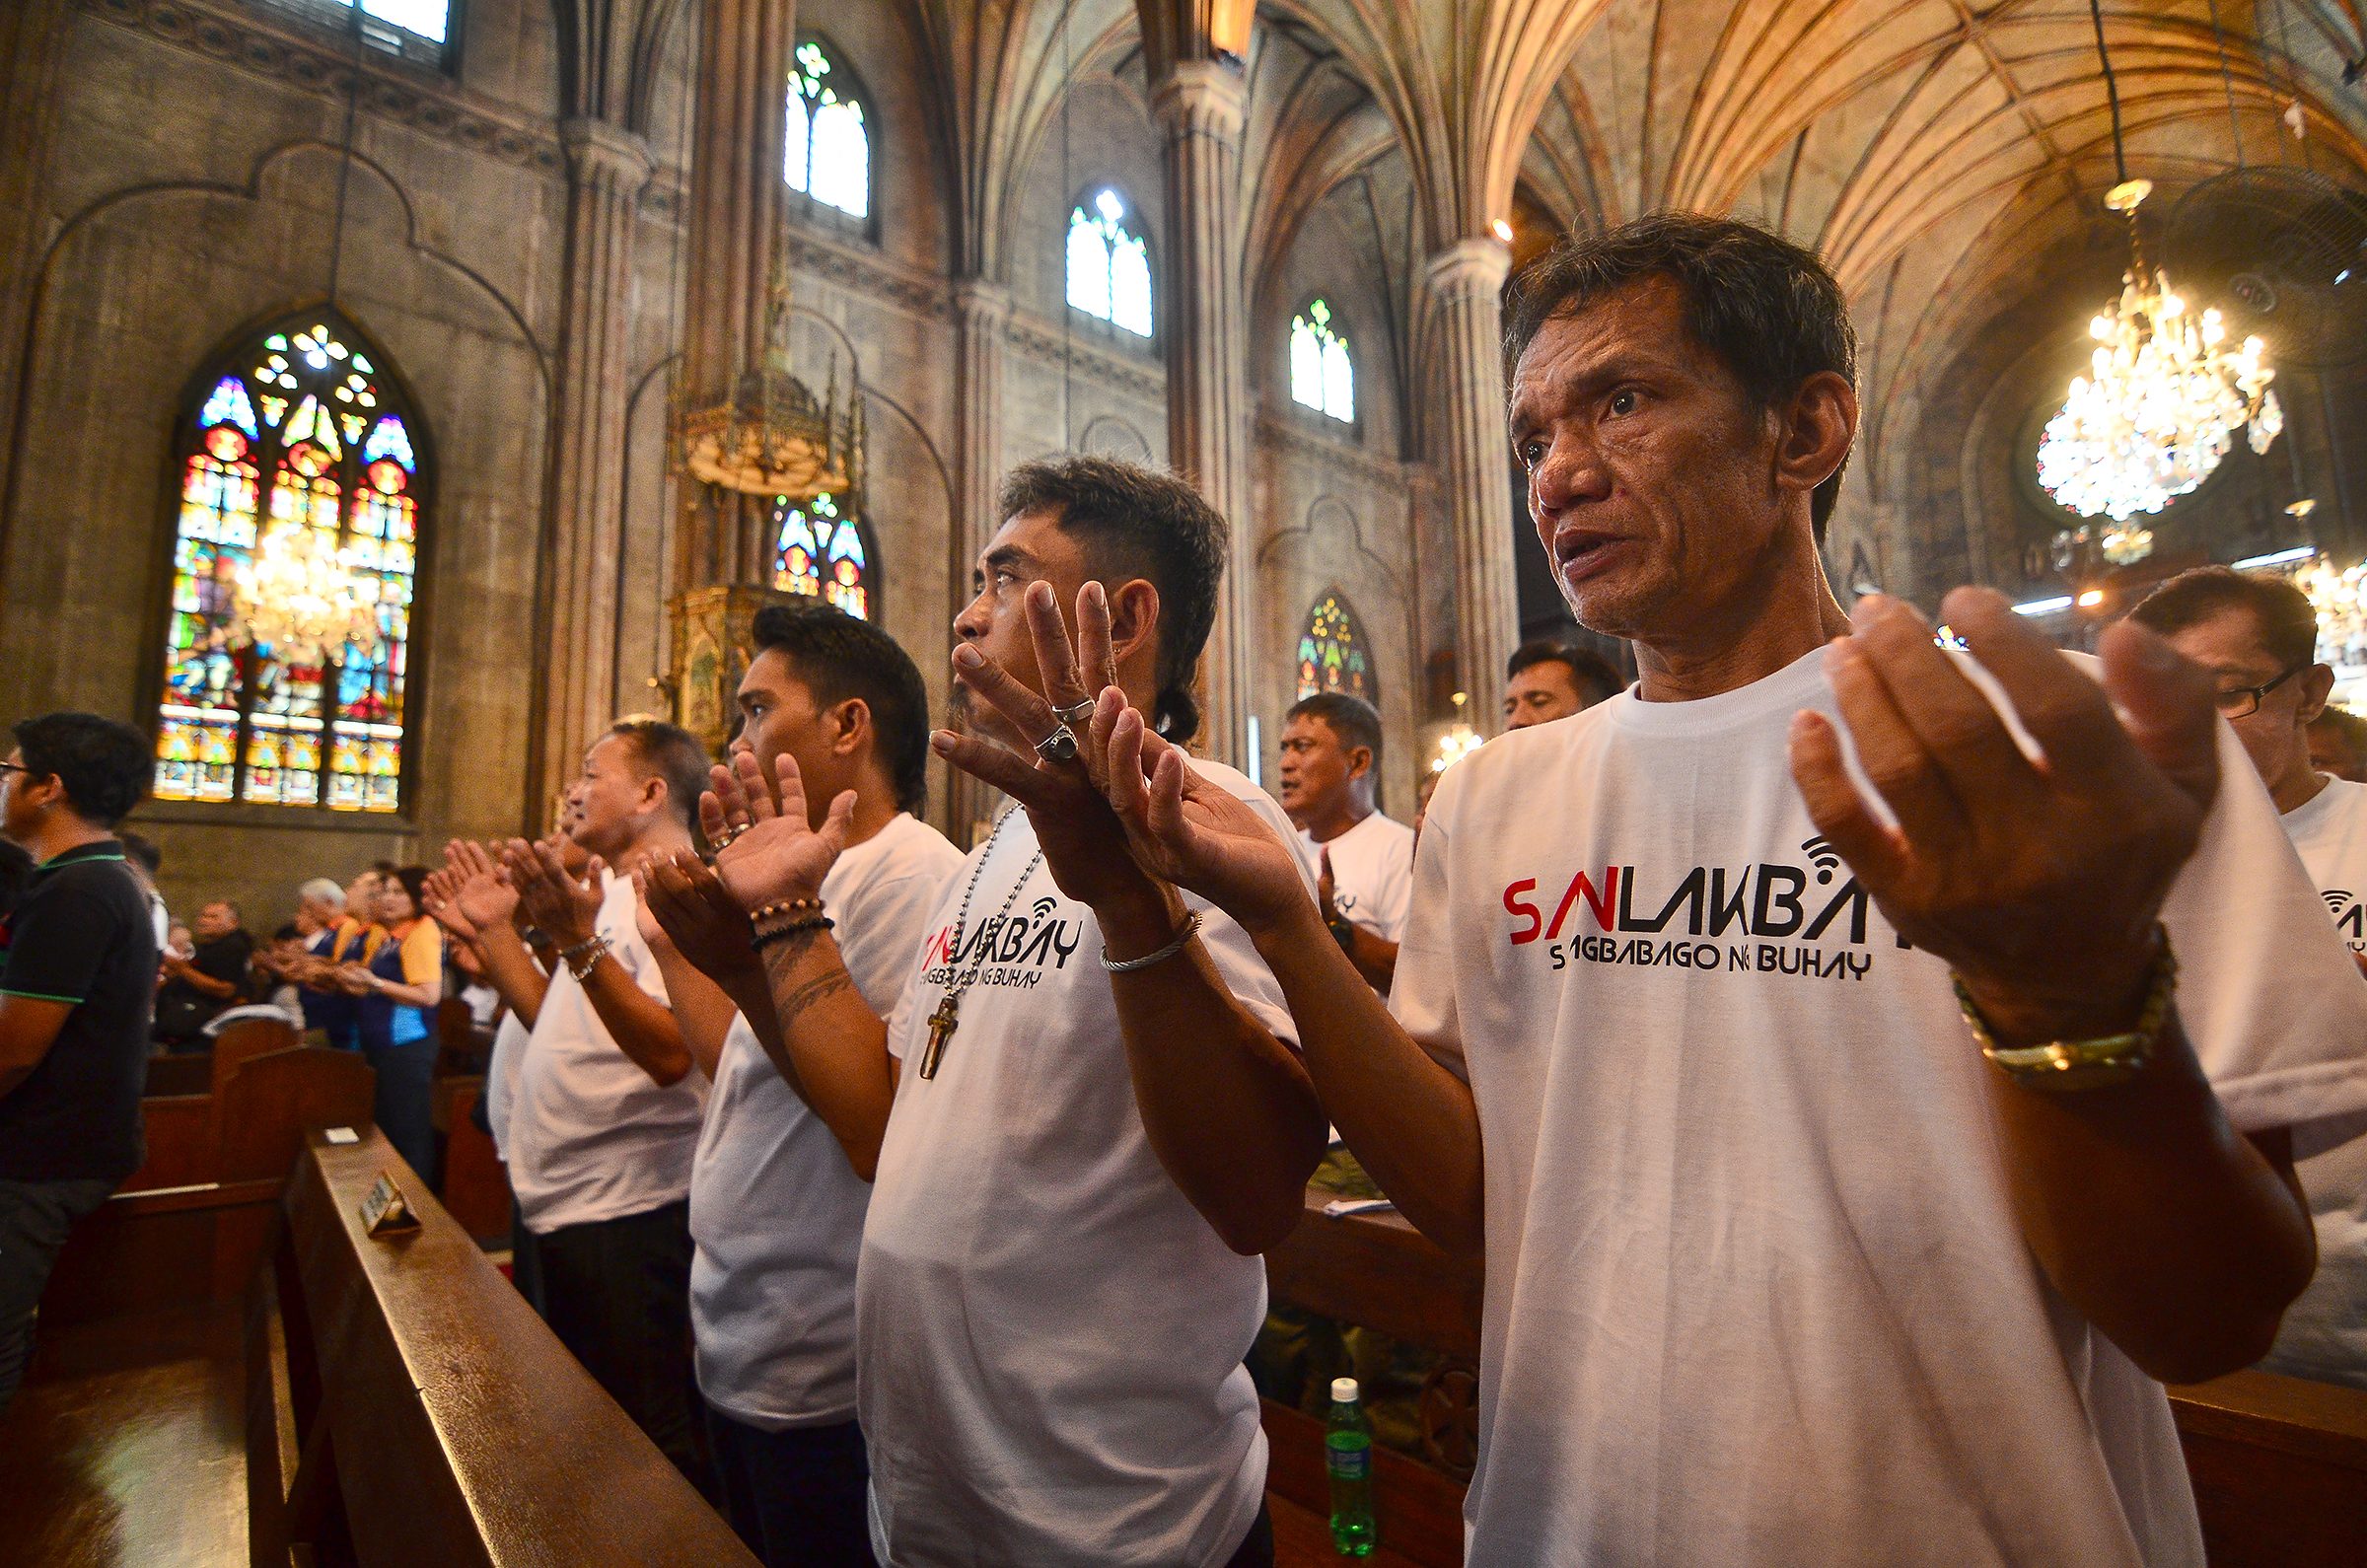 LORD'S PRAYER. Former drug dependents raise their hands as they sing the Lord's Prayer. Photo by Maria Tan  